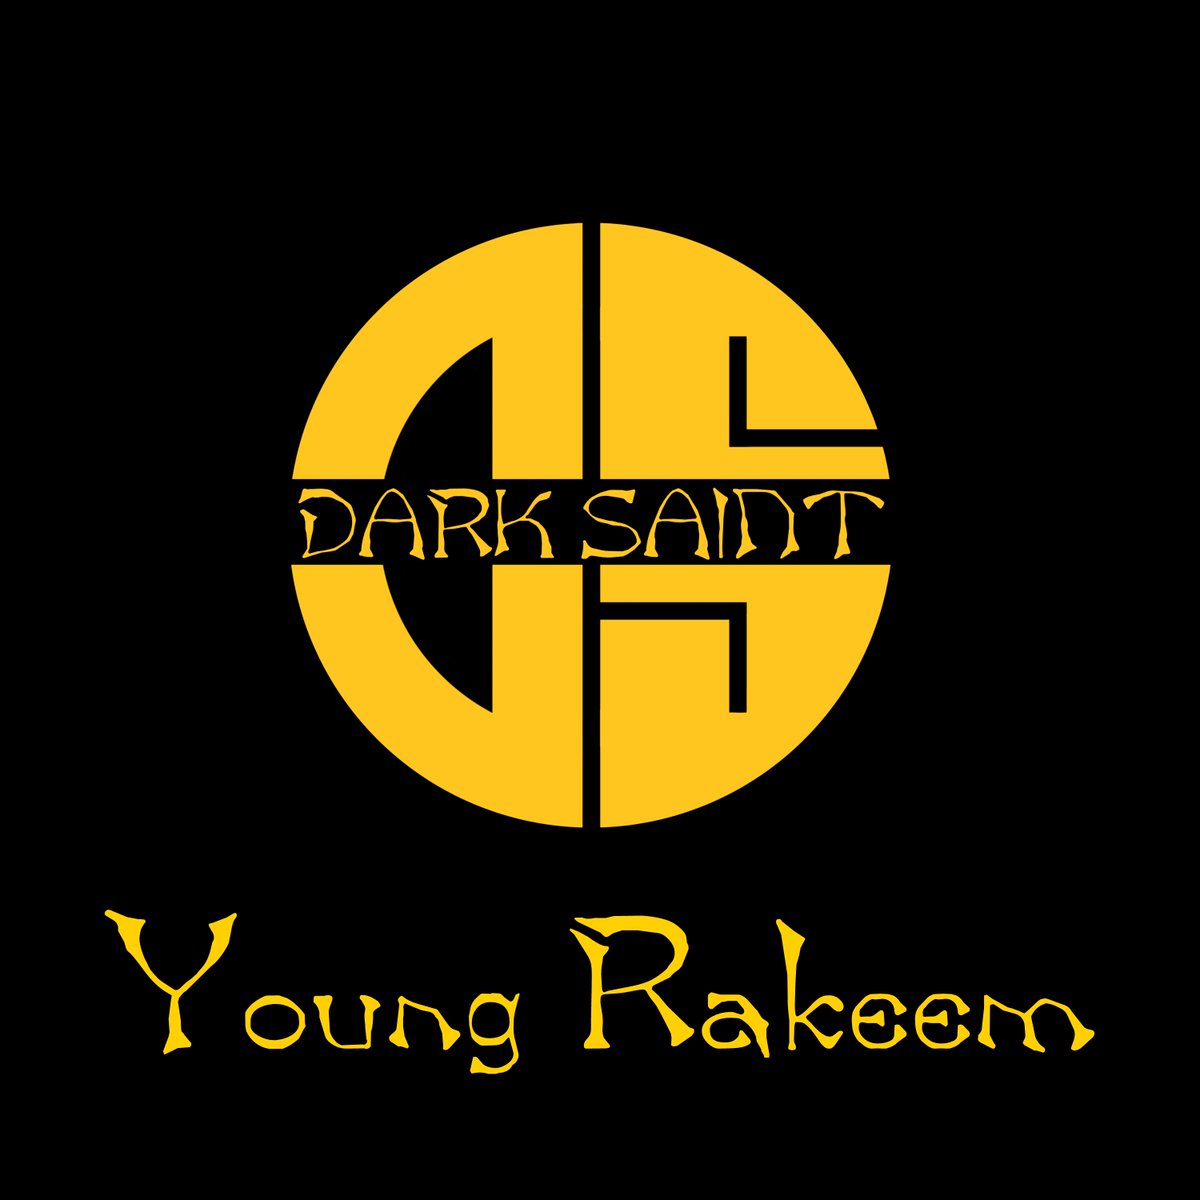 🚨🚨New Single 🚨🚨 YOUNG RAKEEM By @CapeVerdeCas Remixes Featuring Shy DTB, @BrianKeithCouto, HuhshuH, @Tfreekinb1 & @meta_groove @DarkSaintRec Available for purchase on digital storefronts on 4/16 Available on all streaming platforms on 4/19